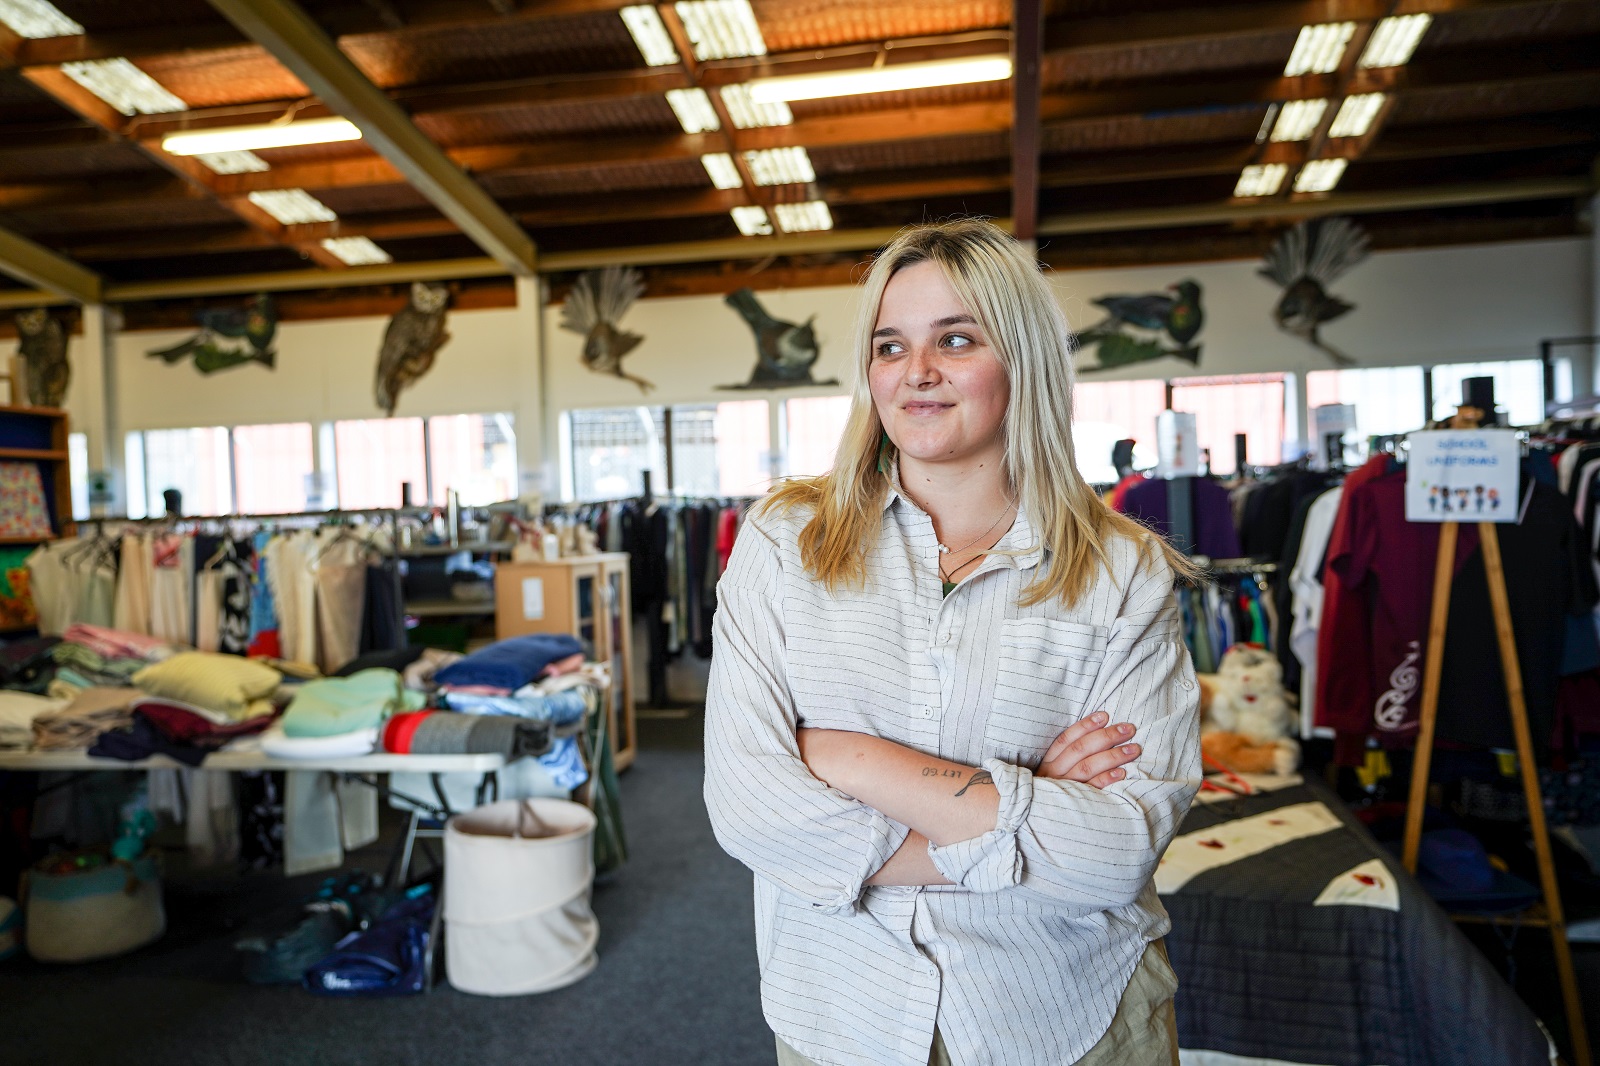 Marketing and Communications Specialist Lauren Cavanagh showcases cool second-hand finds for sale at the centre in videos on TikTok and Instagram.